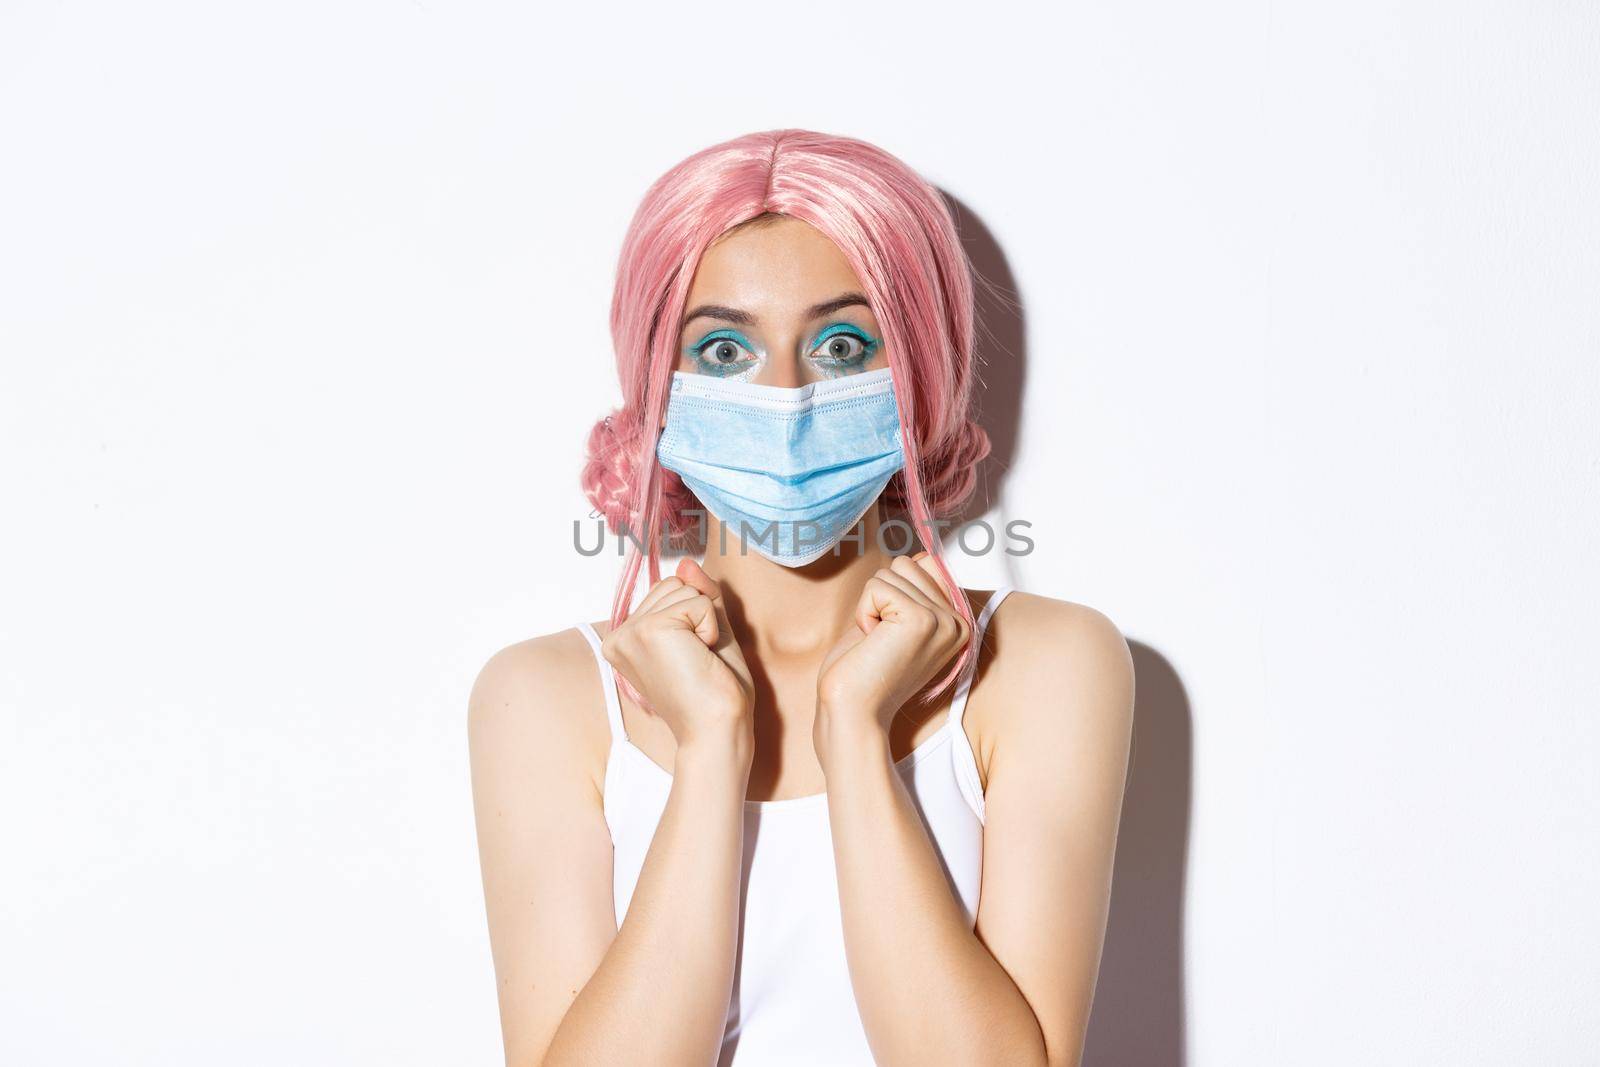 Coronavirus, social distancing and lifestyle concept. Close-up of excited attractive girl in pink wig and medical mask, looking with hope at camera, standing over white background.